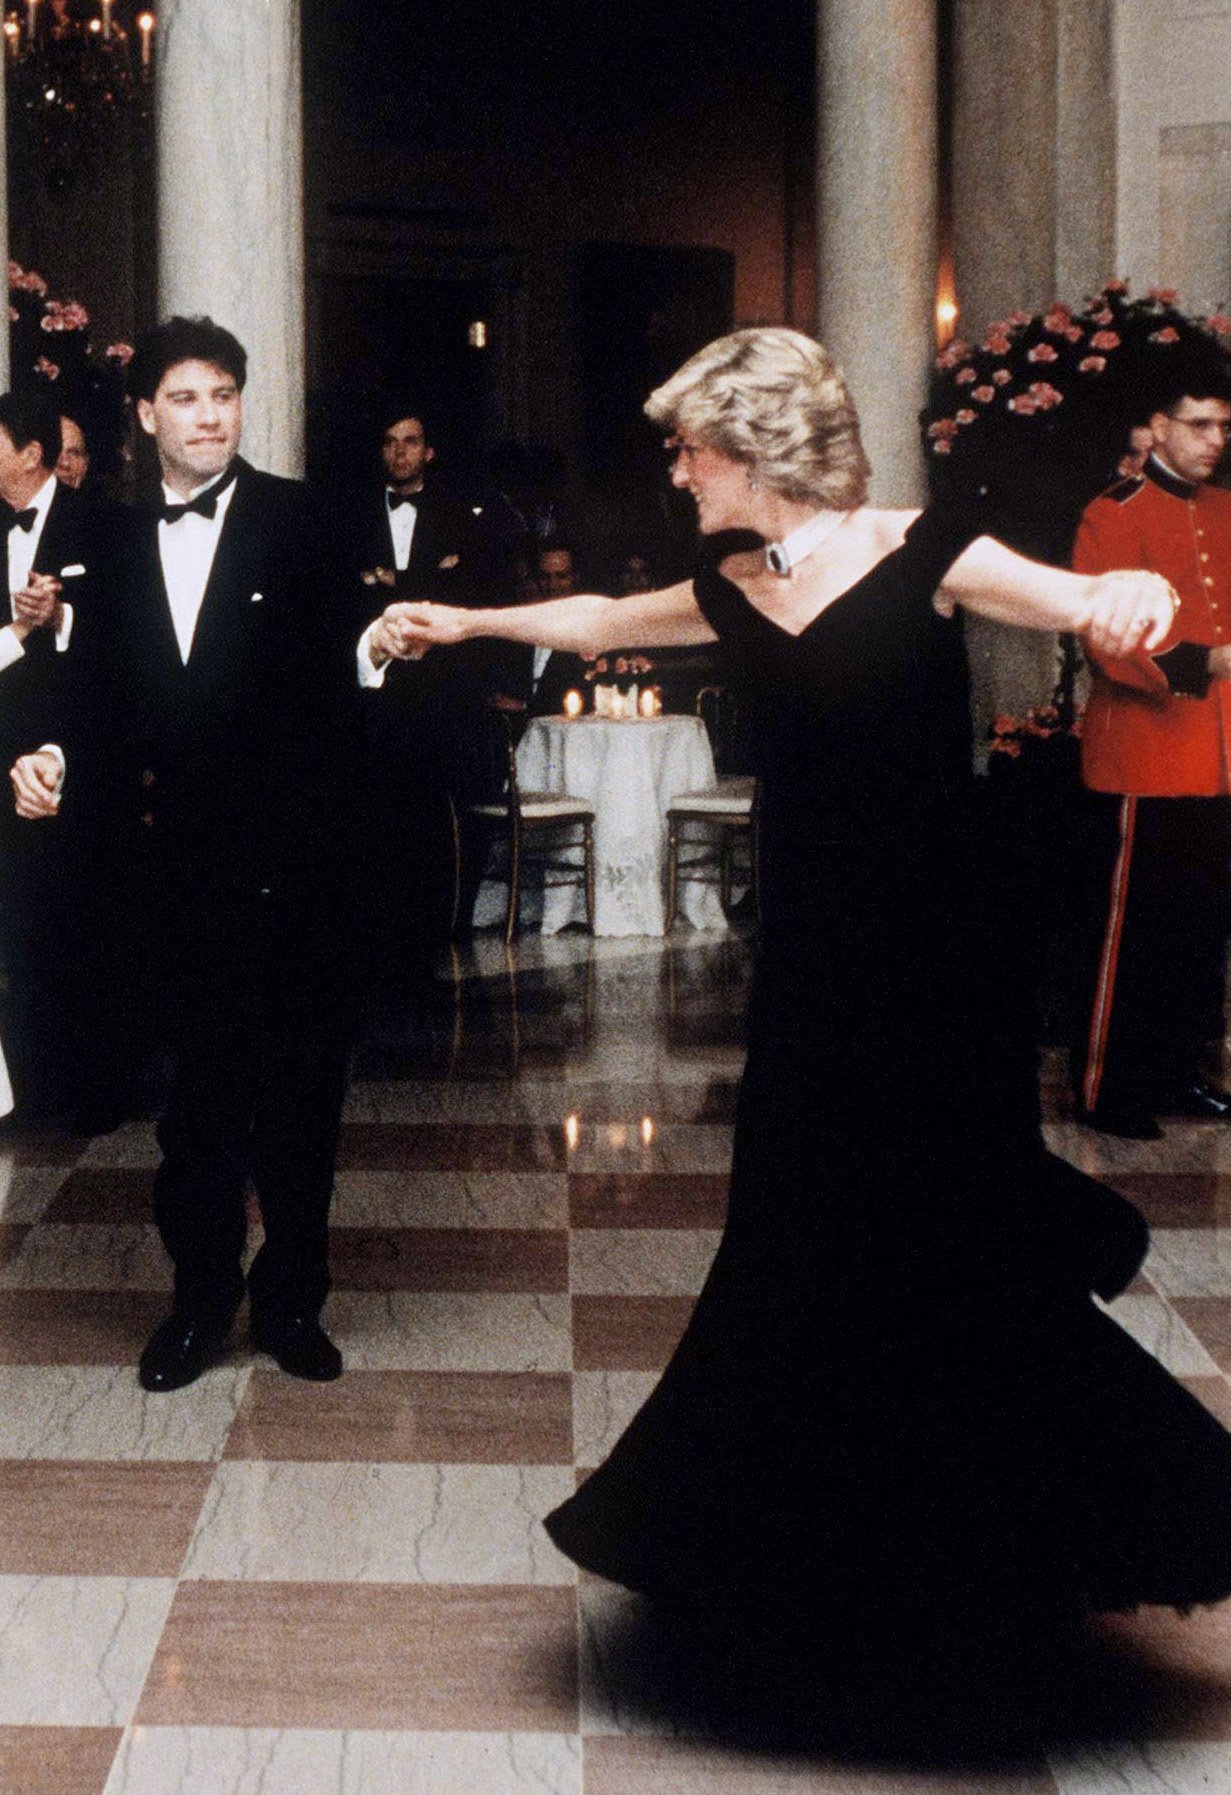 Princess Diana dancing with John Travolta in 1985 | Photo: Getty Images